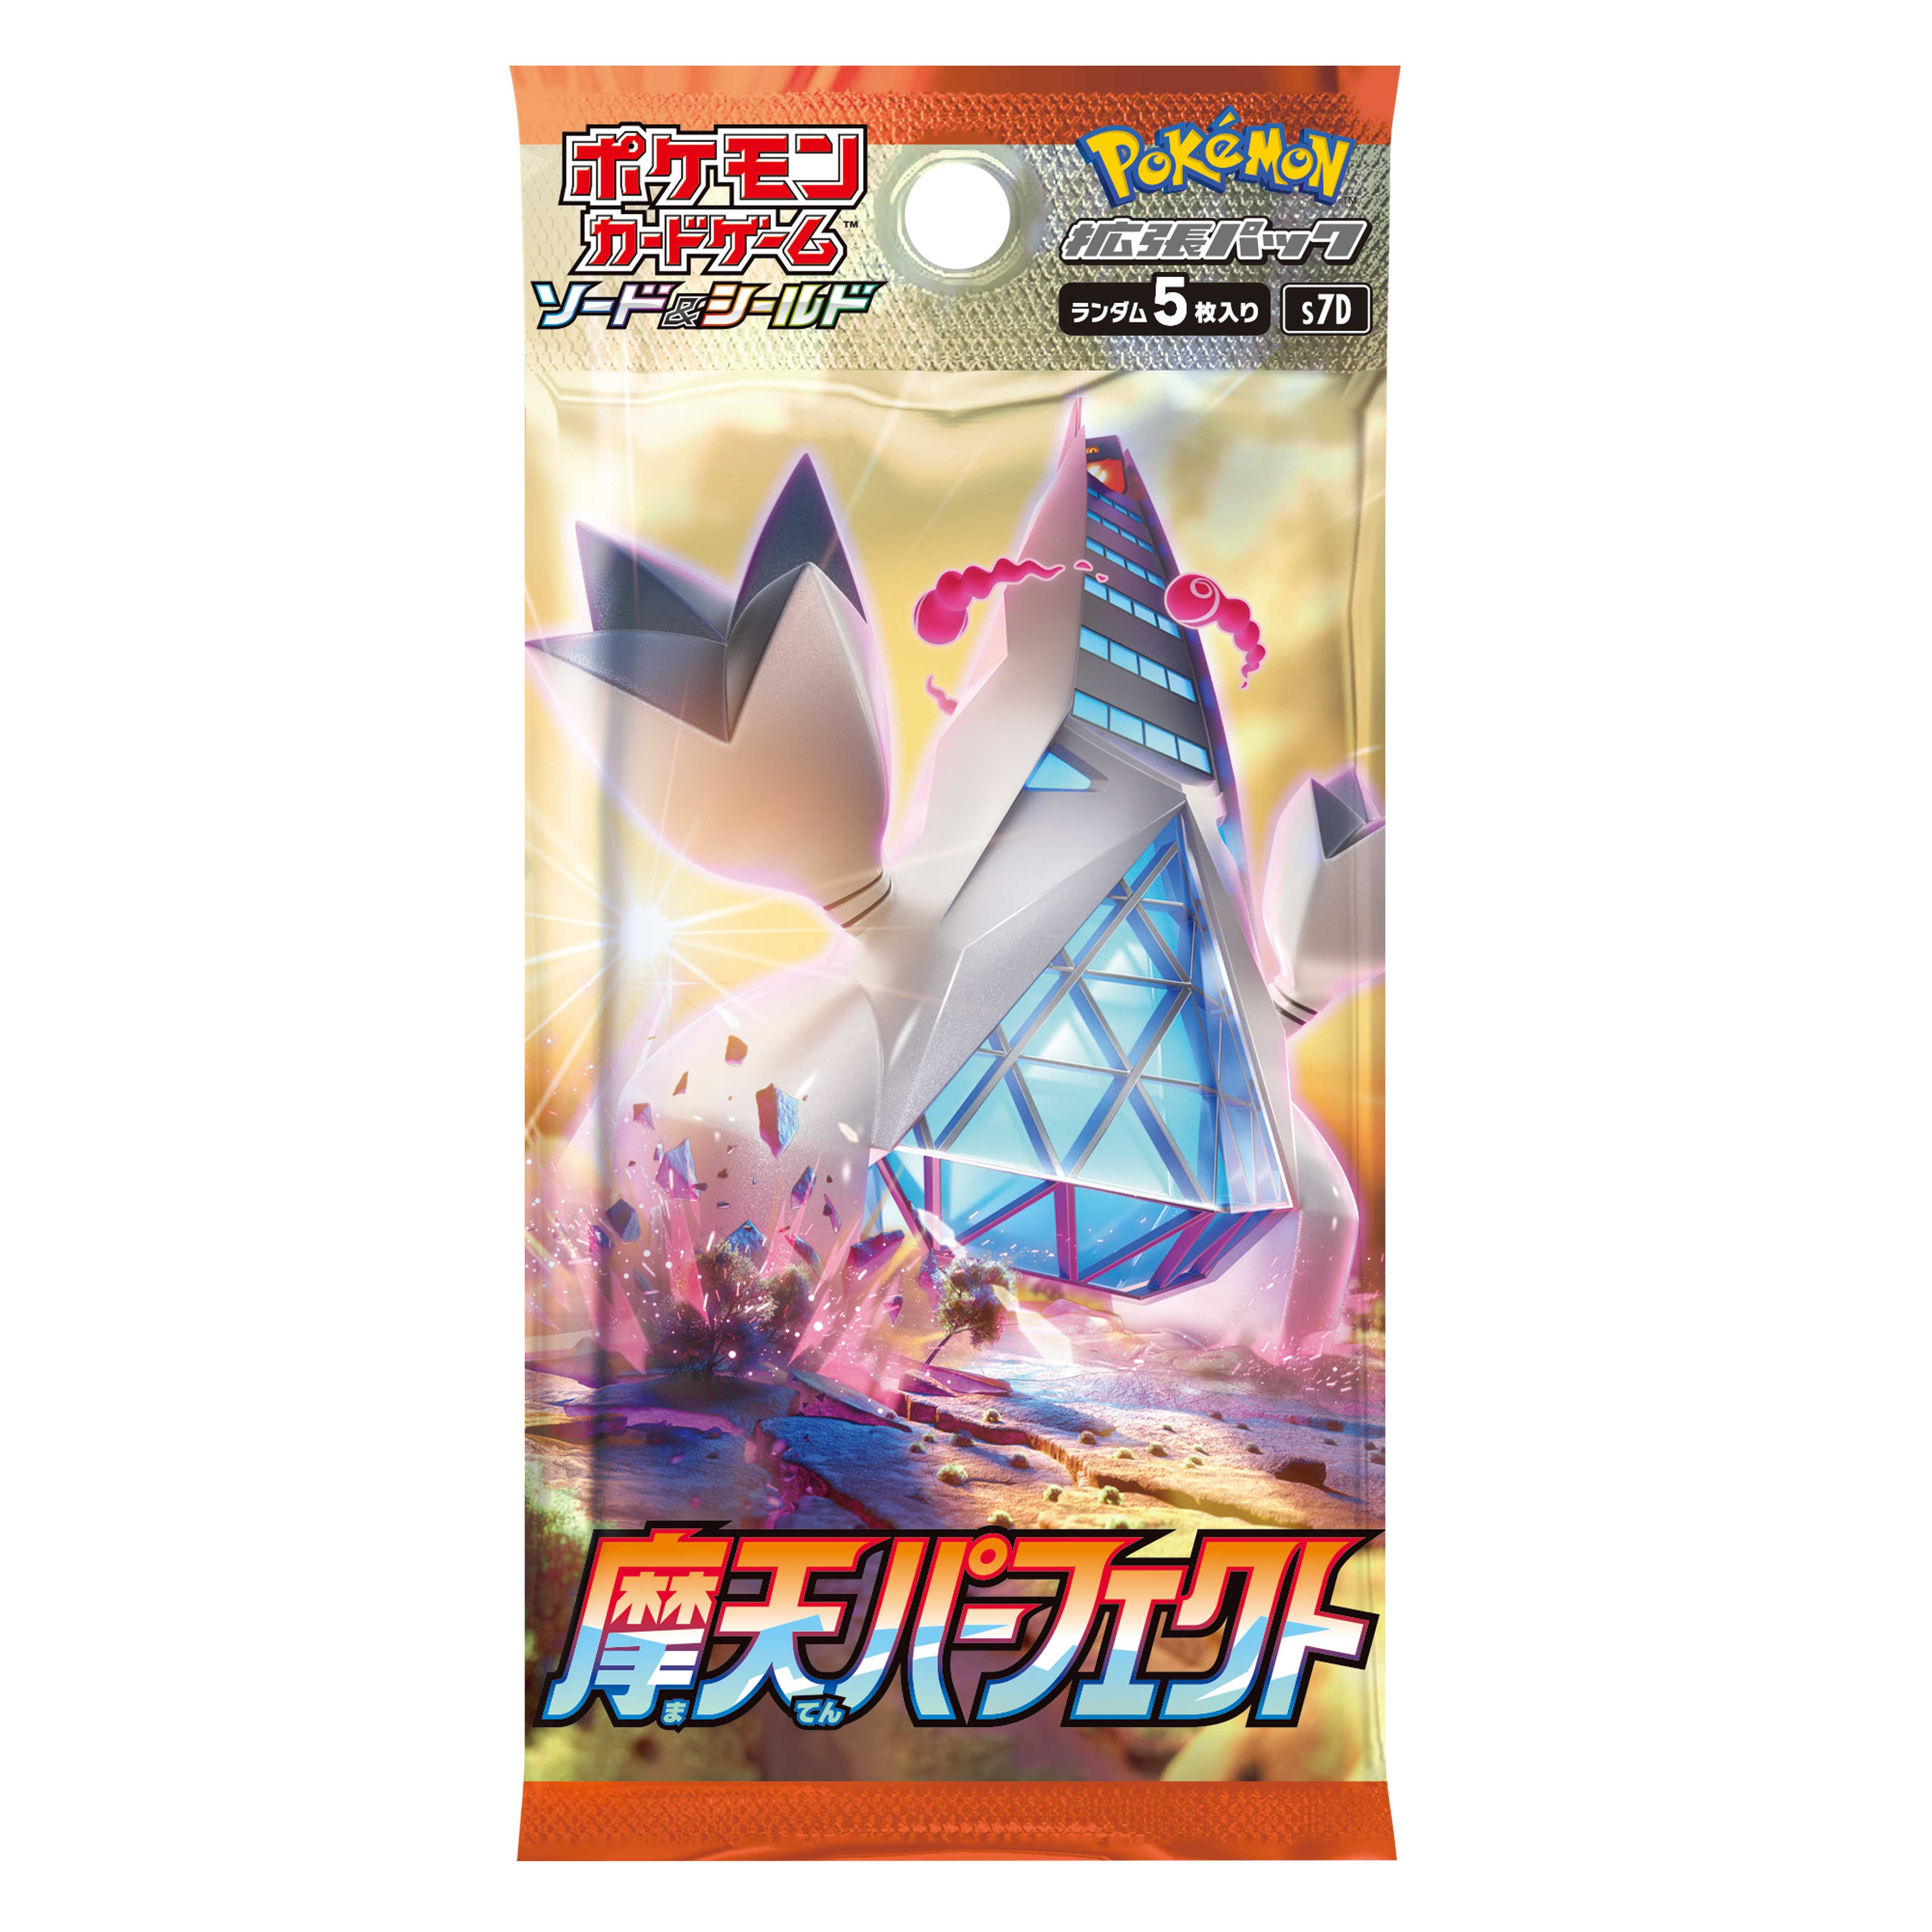 Pokémon Card Sword & Shield "Skyscraping Perfect" Duraludon [S7D] (japanese booster box)--1